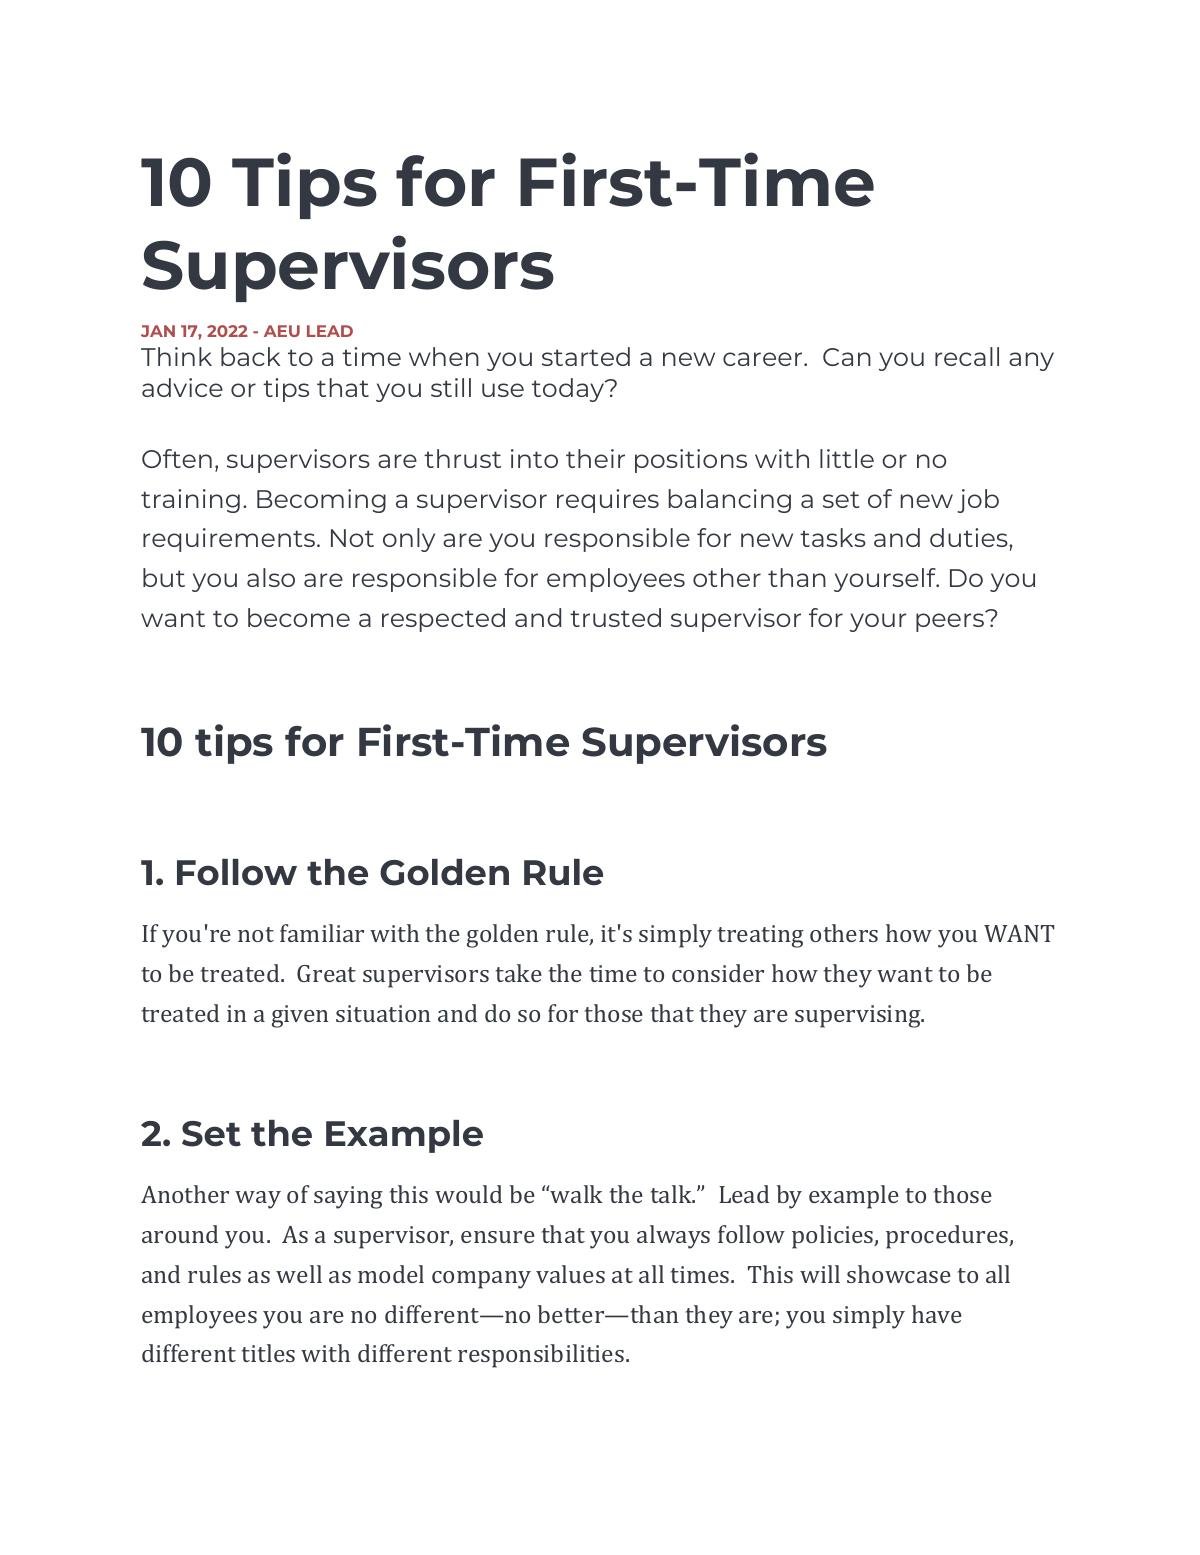 10 Tips for First-Time Supervisors